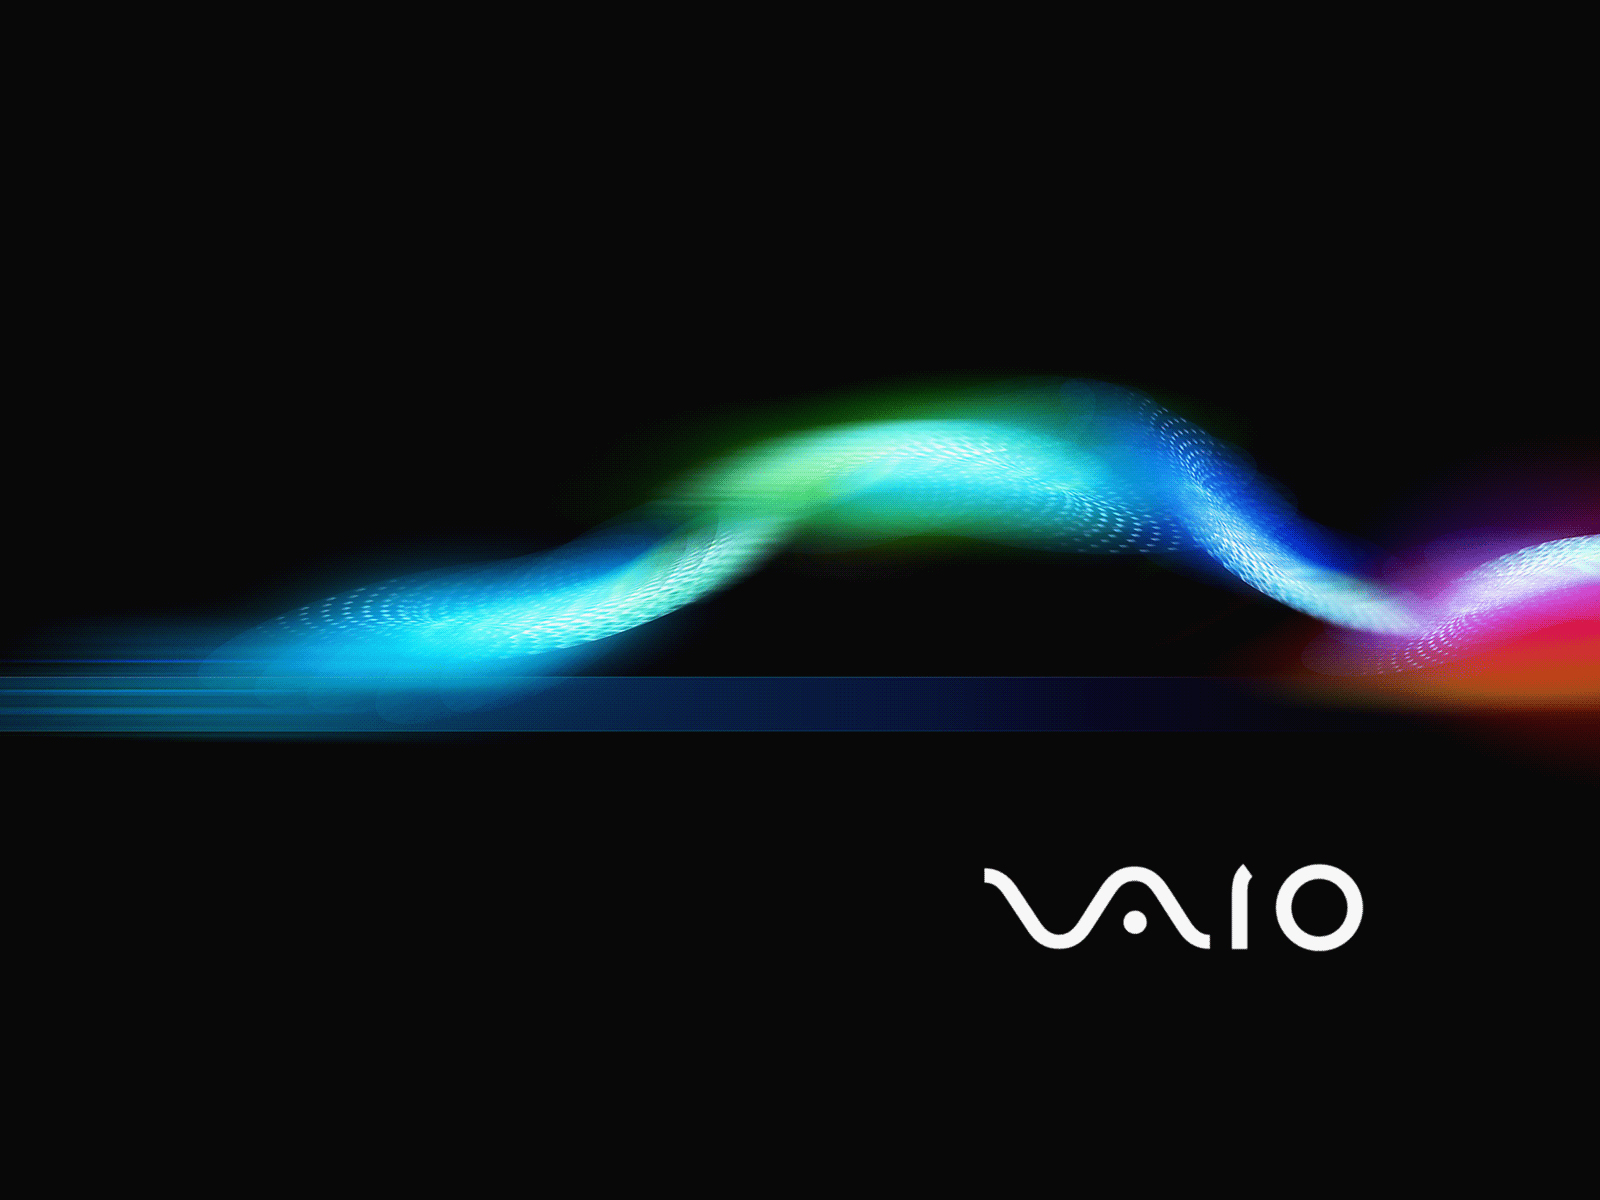 Free Download Hd Sony Vaio Wallpapers Vaio Backgrounds For Download 1600x10 For Your Desktop Mobile Tablet Explore 50 Sony Vaio Wallpaper 1080p Sony Wallpapers 19x1080 Sony Vaio Desktop Wallpaper